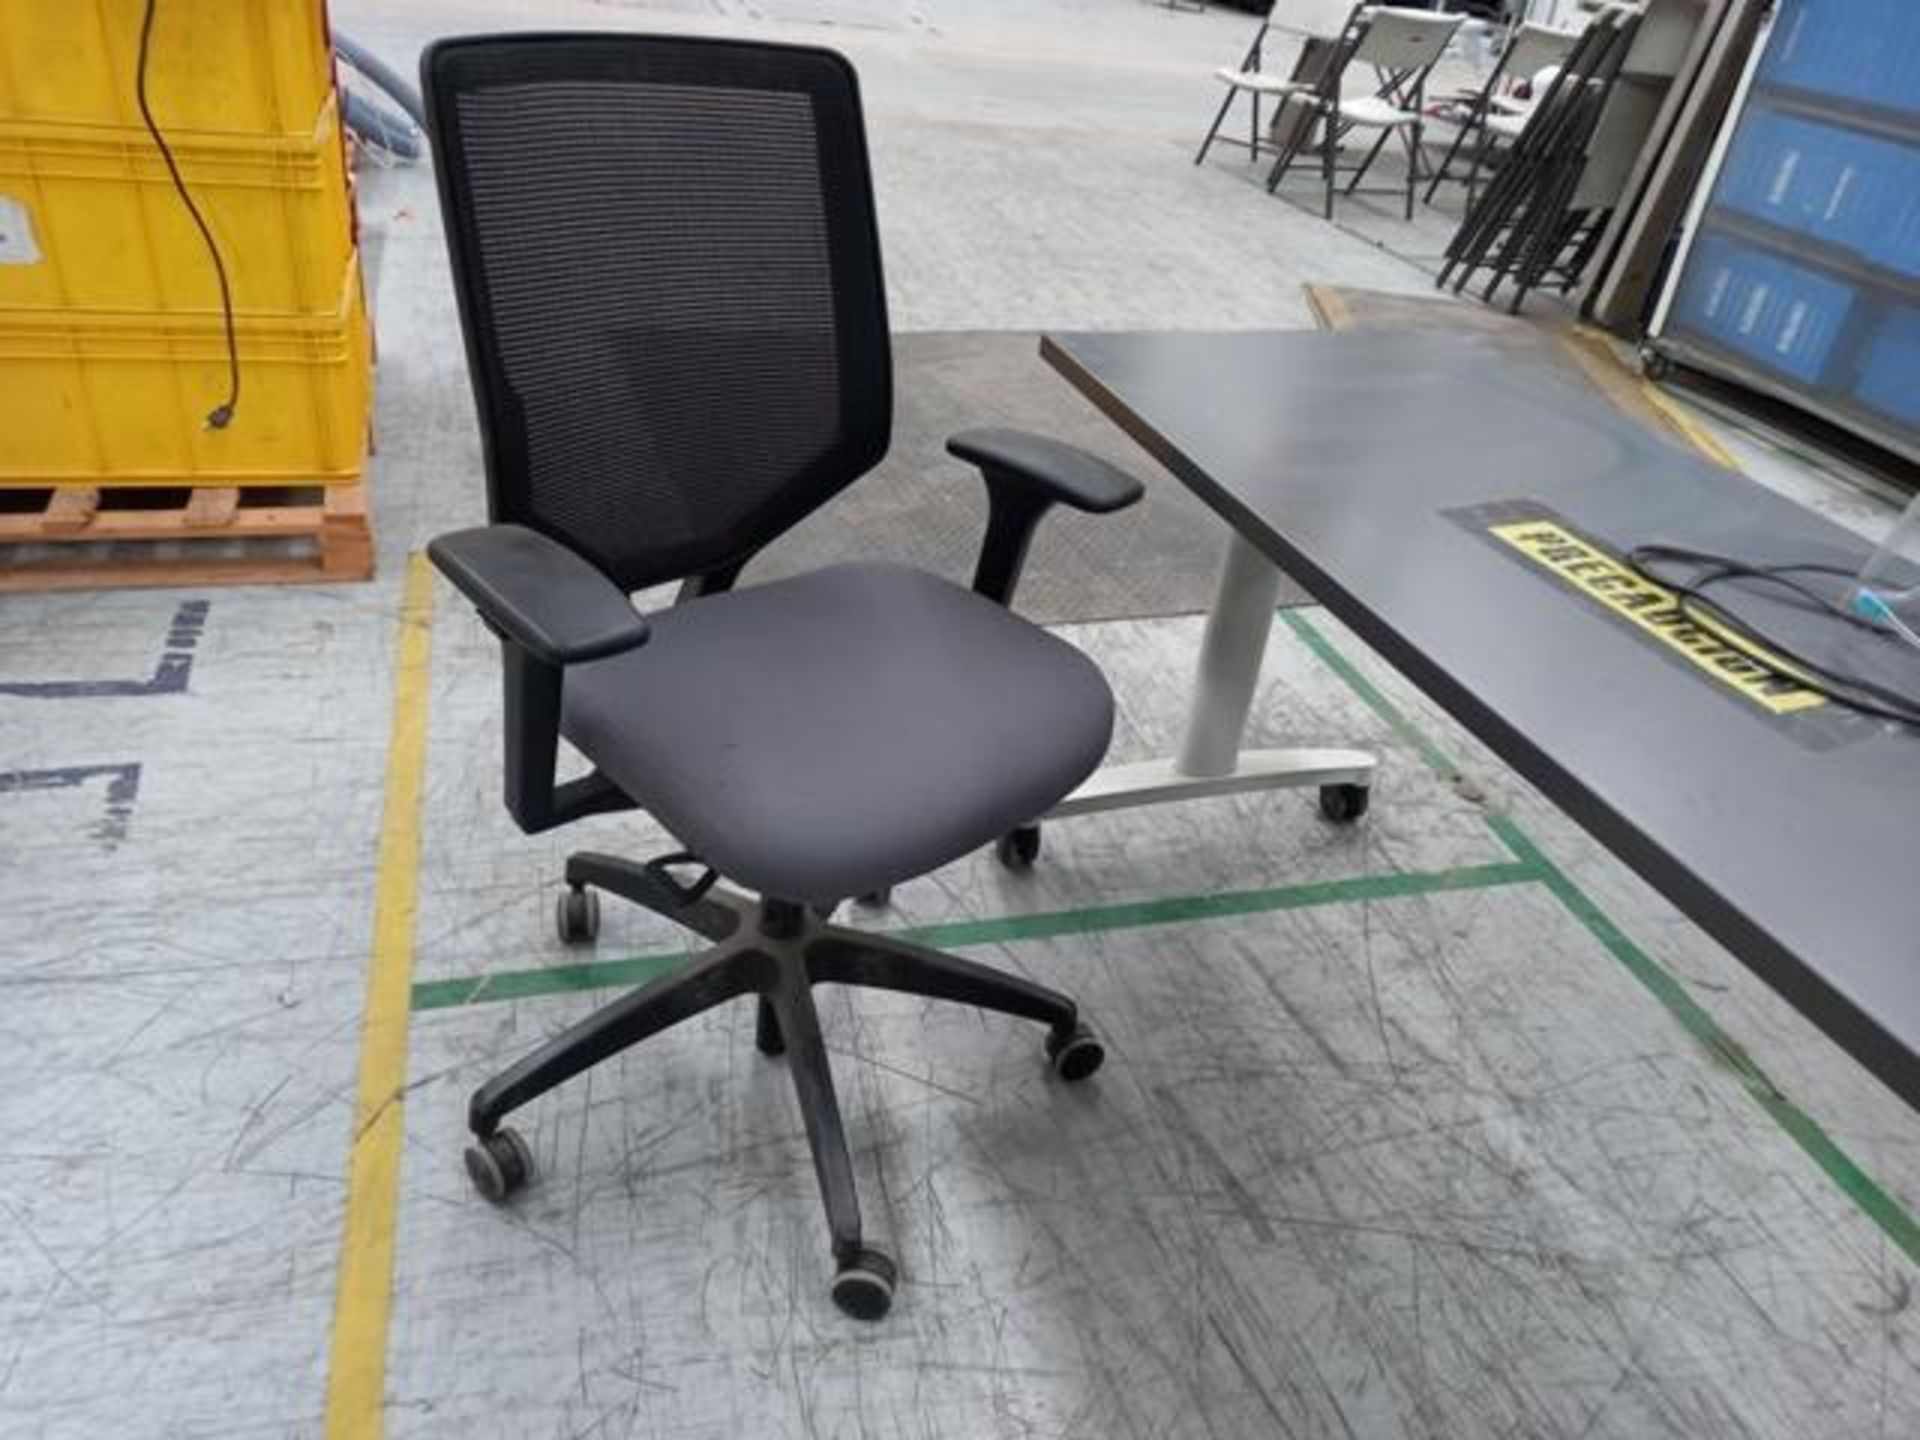 LOT: (66) Of Furniture and Computing Equipment Consisting of: Computers, Printers, Desks, Chairs, Dr - Image 8 of 38